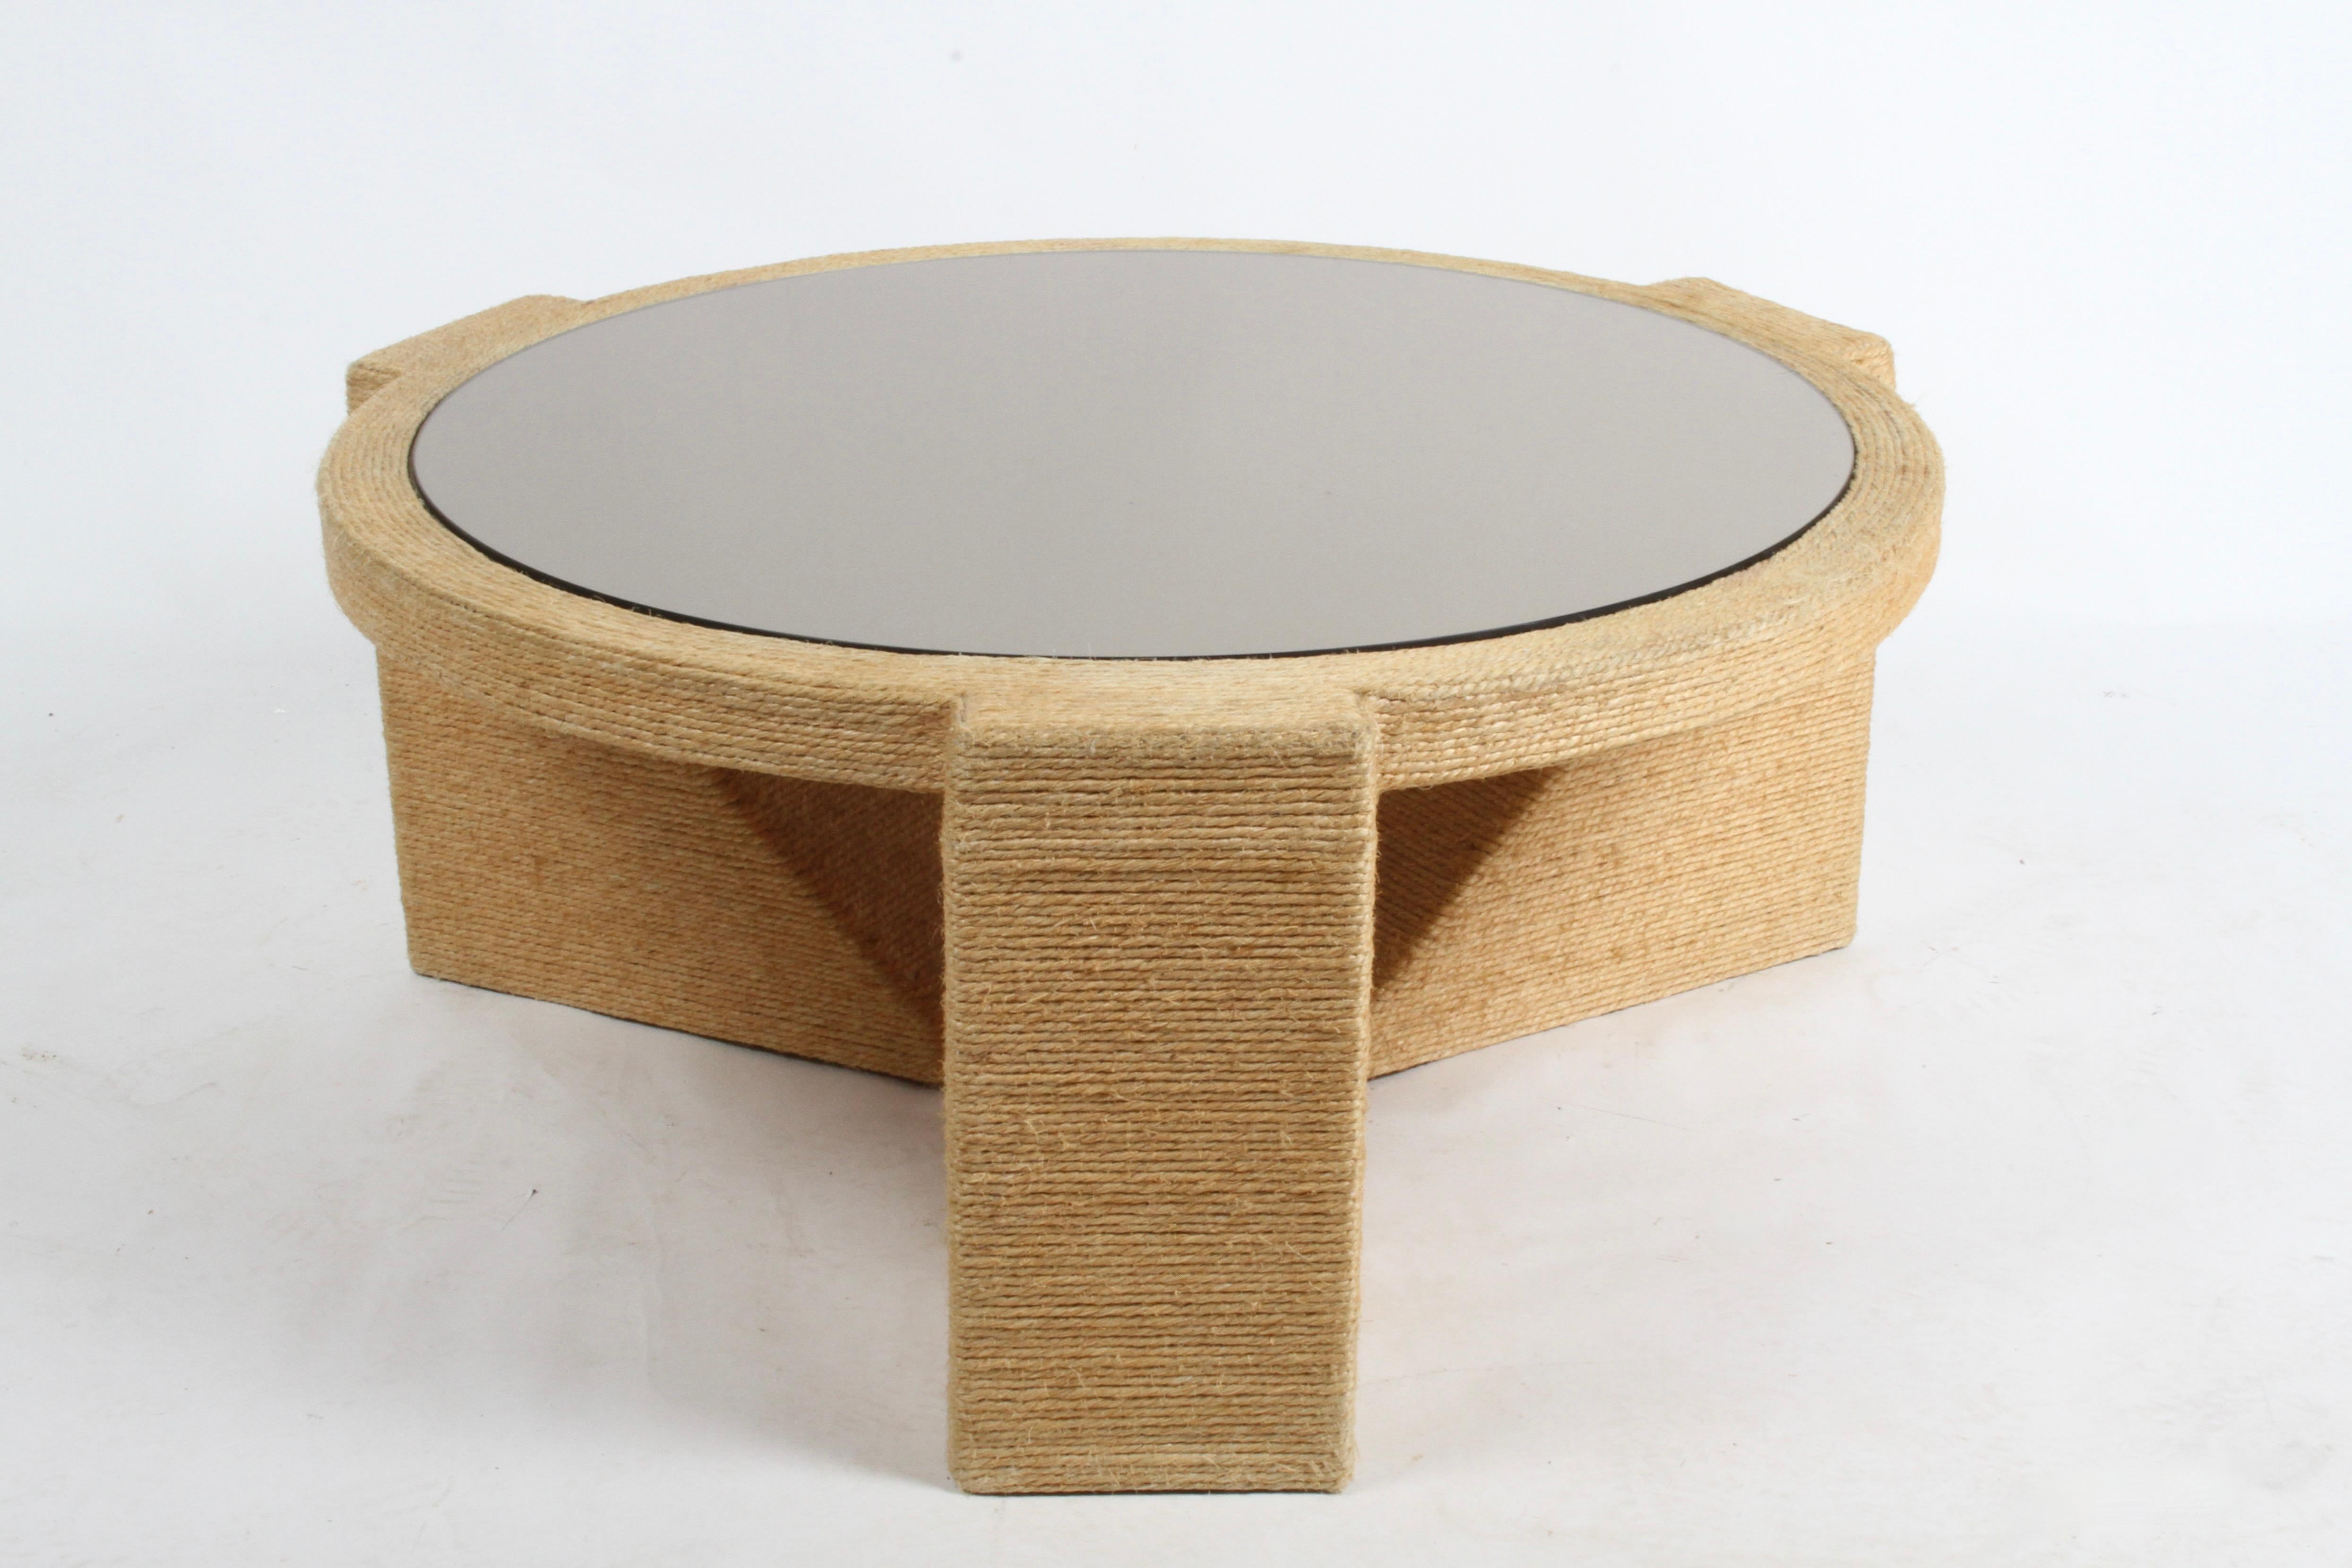 Late 20th Century Sculptural 1970s Jute Rope Wrapped Round Coffee Table with Bronze Mirror Top For Sale